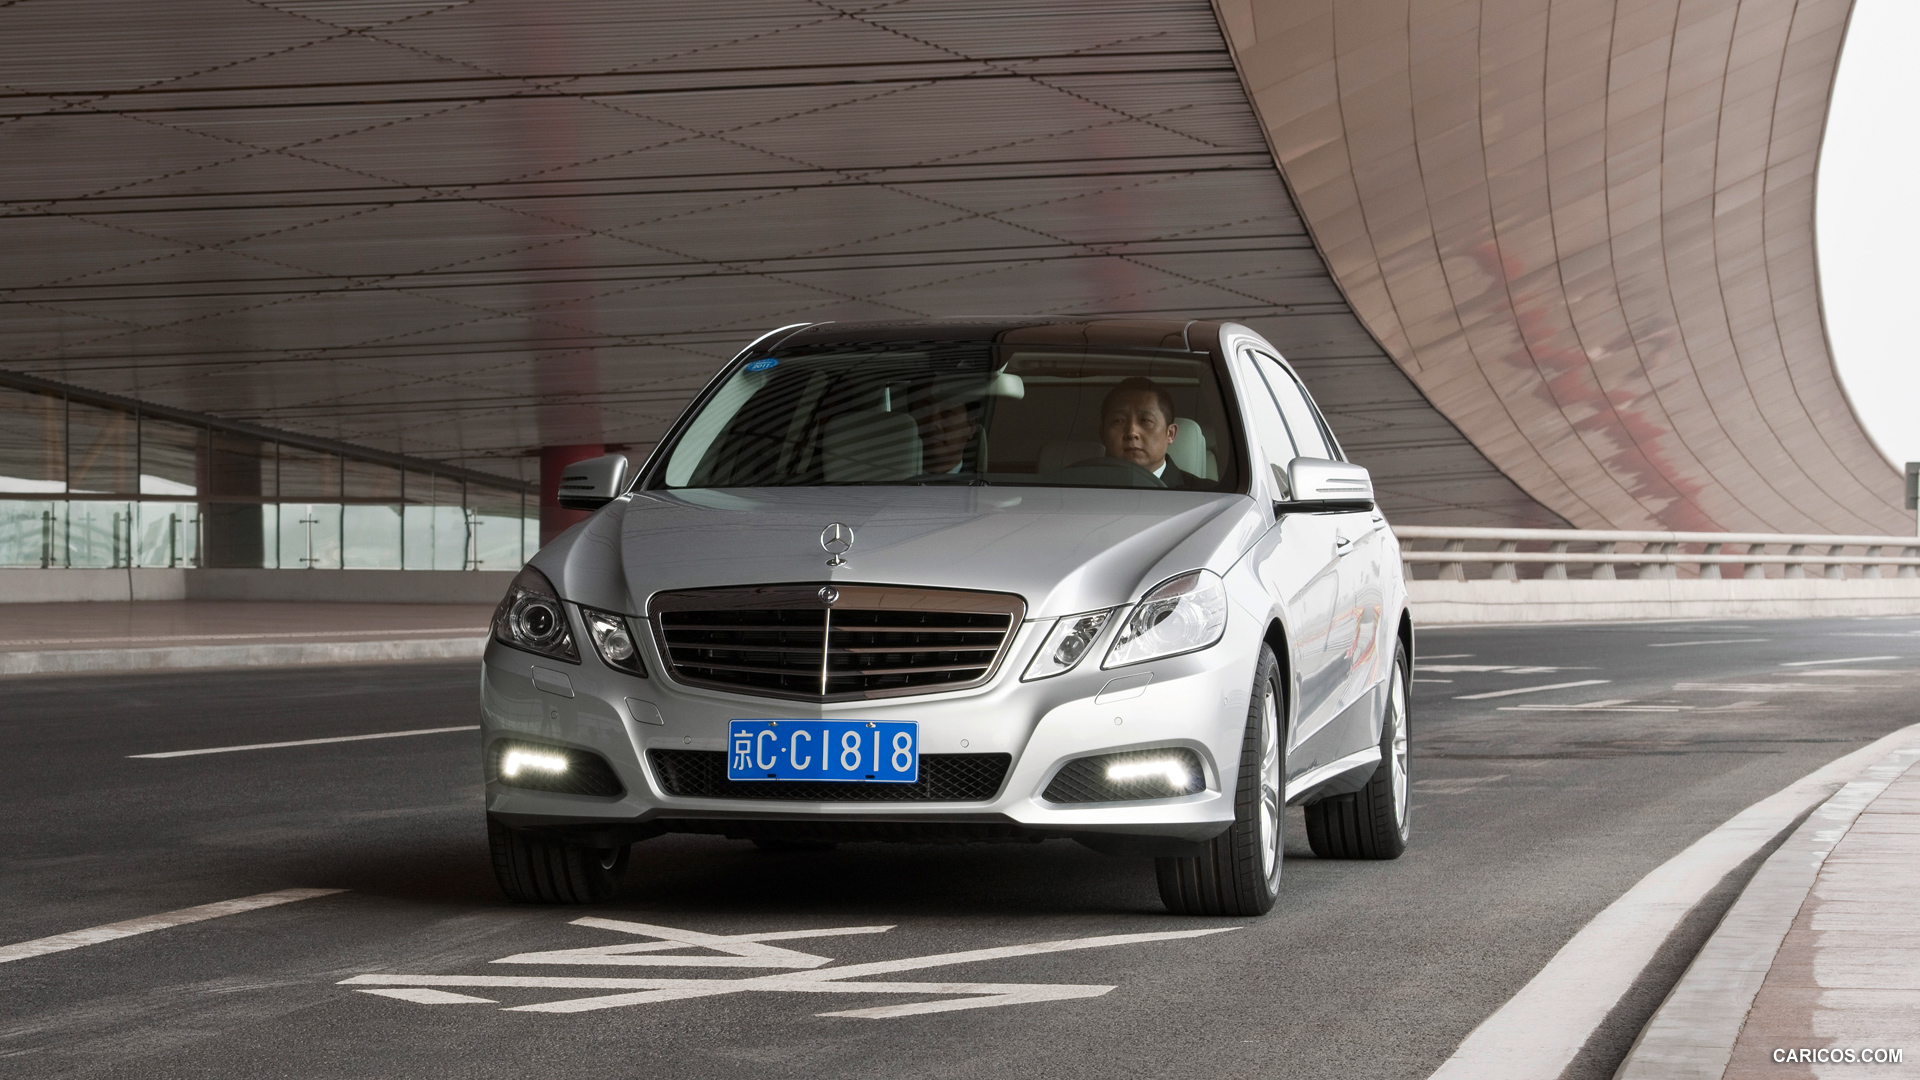 Mercedes-Benz E-Class L (2011)  - Front Angle , #9 of 17